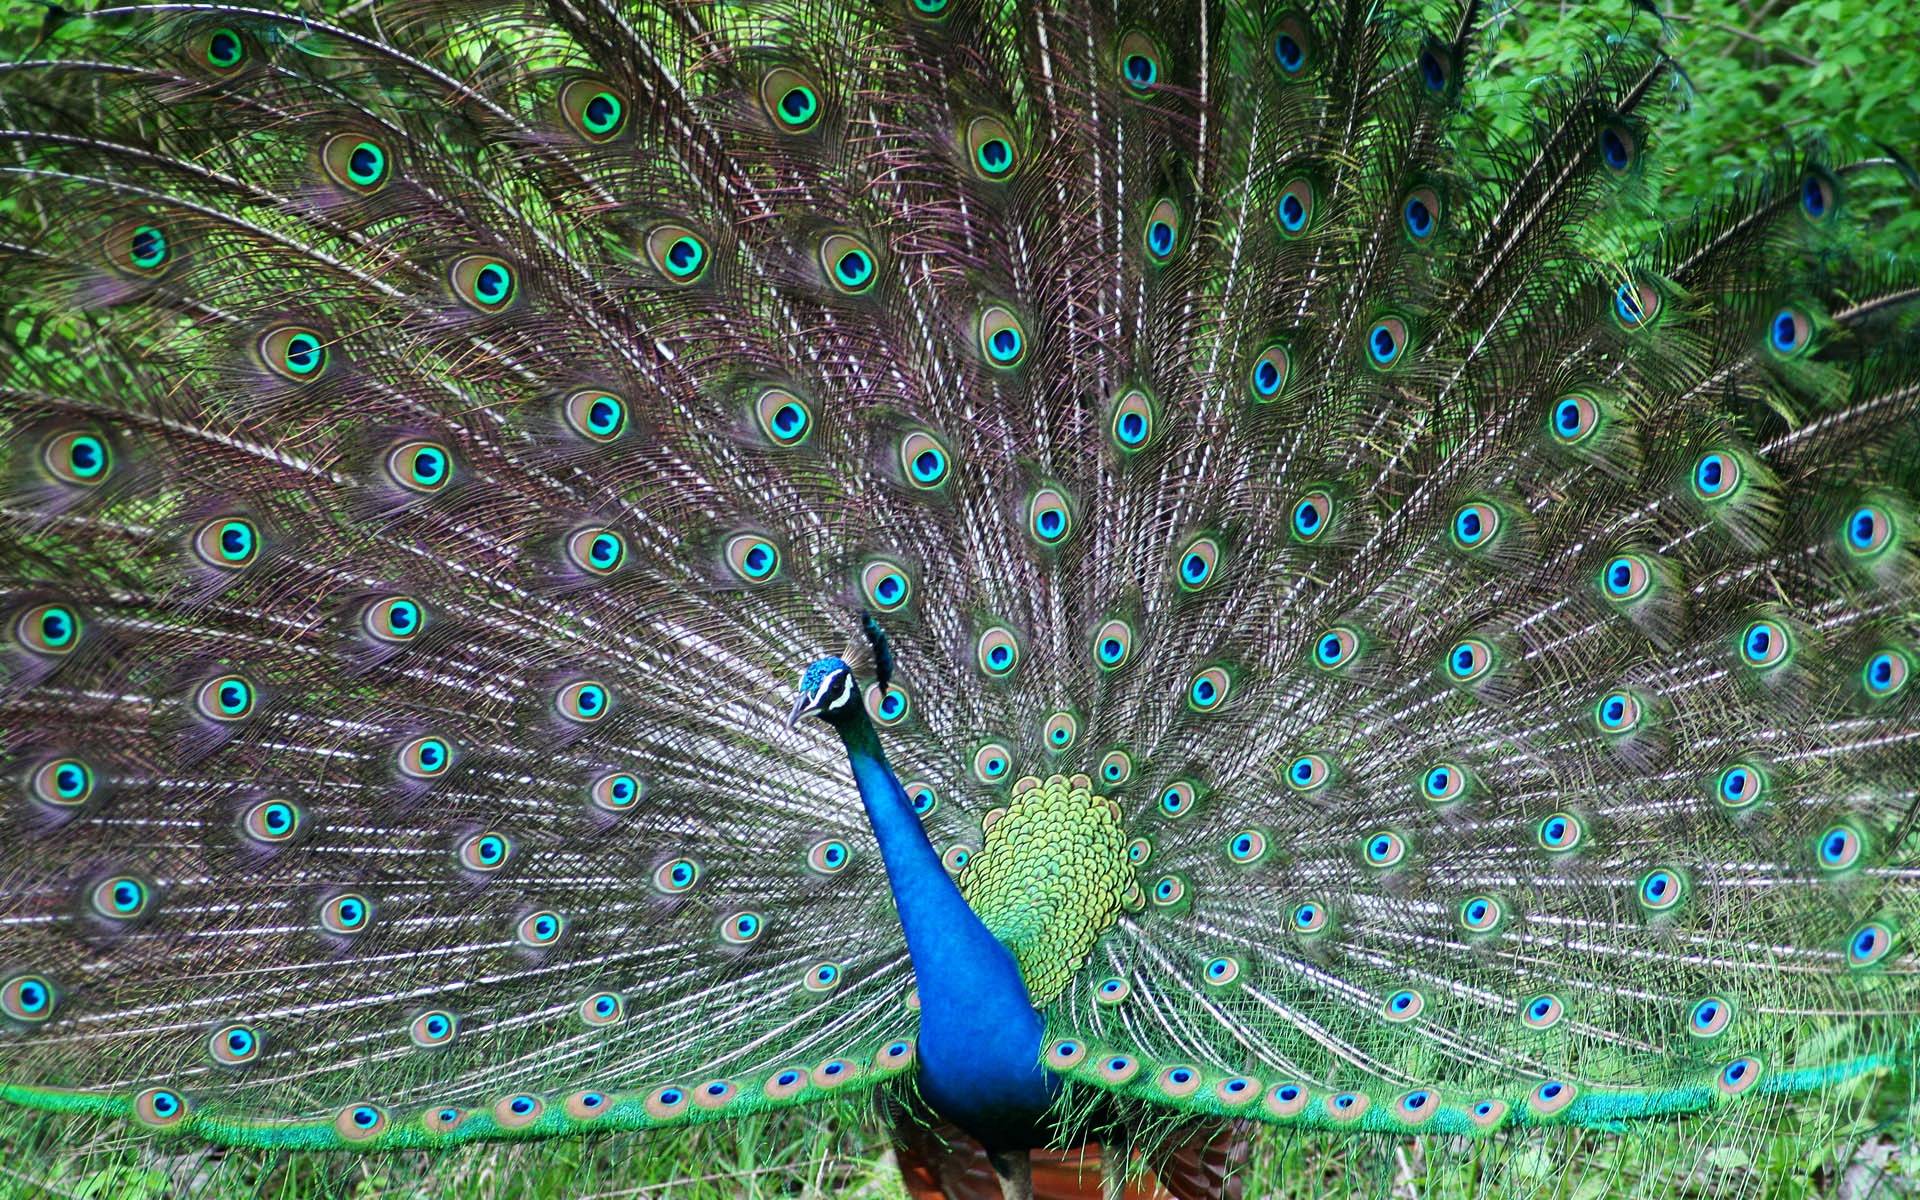 Peacock Feather Wallpaper HD for Desktop Background. Genovic